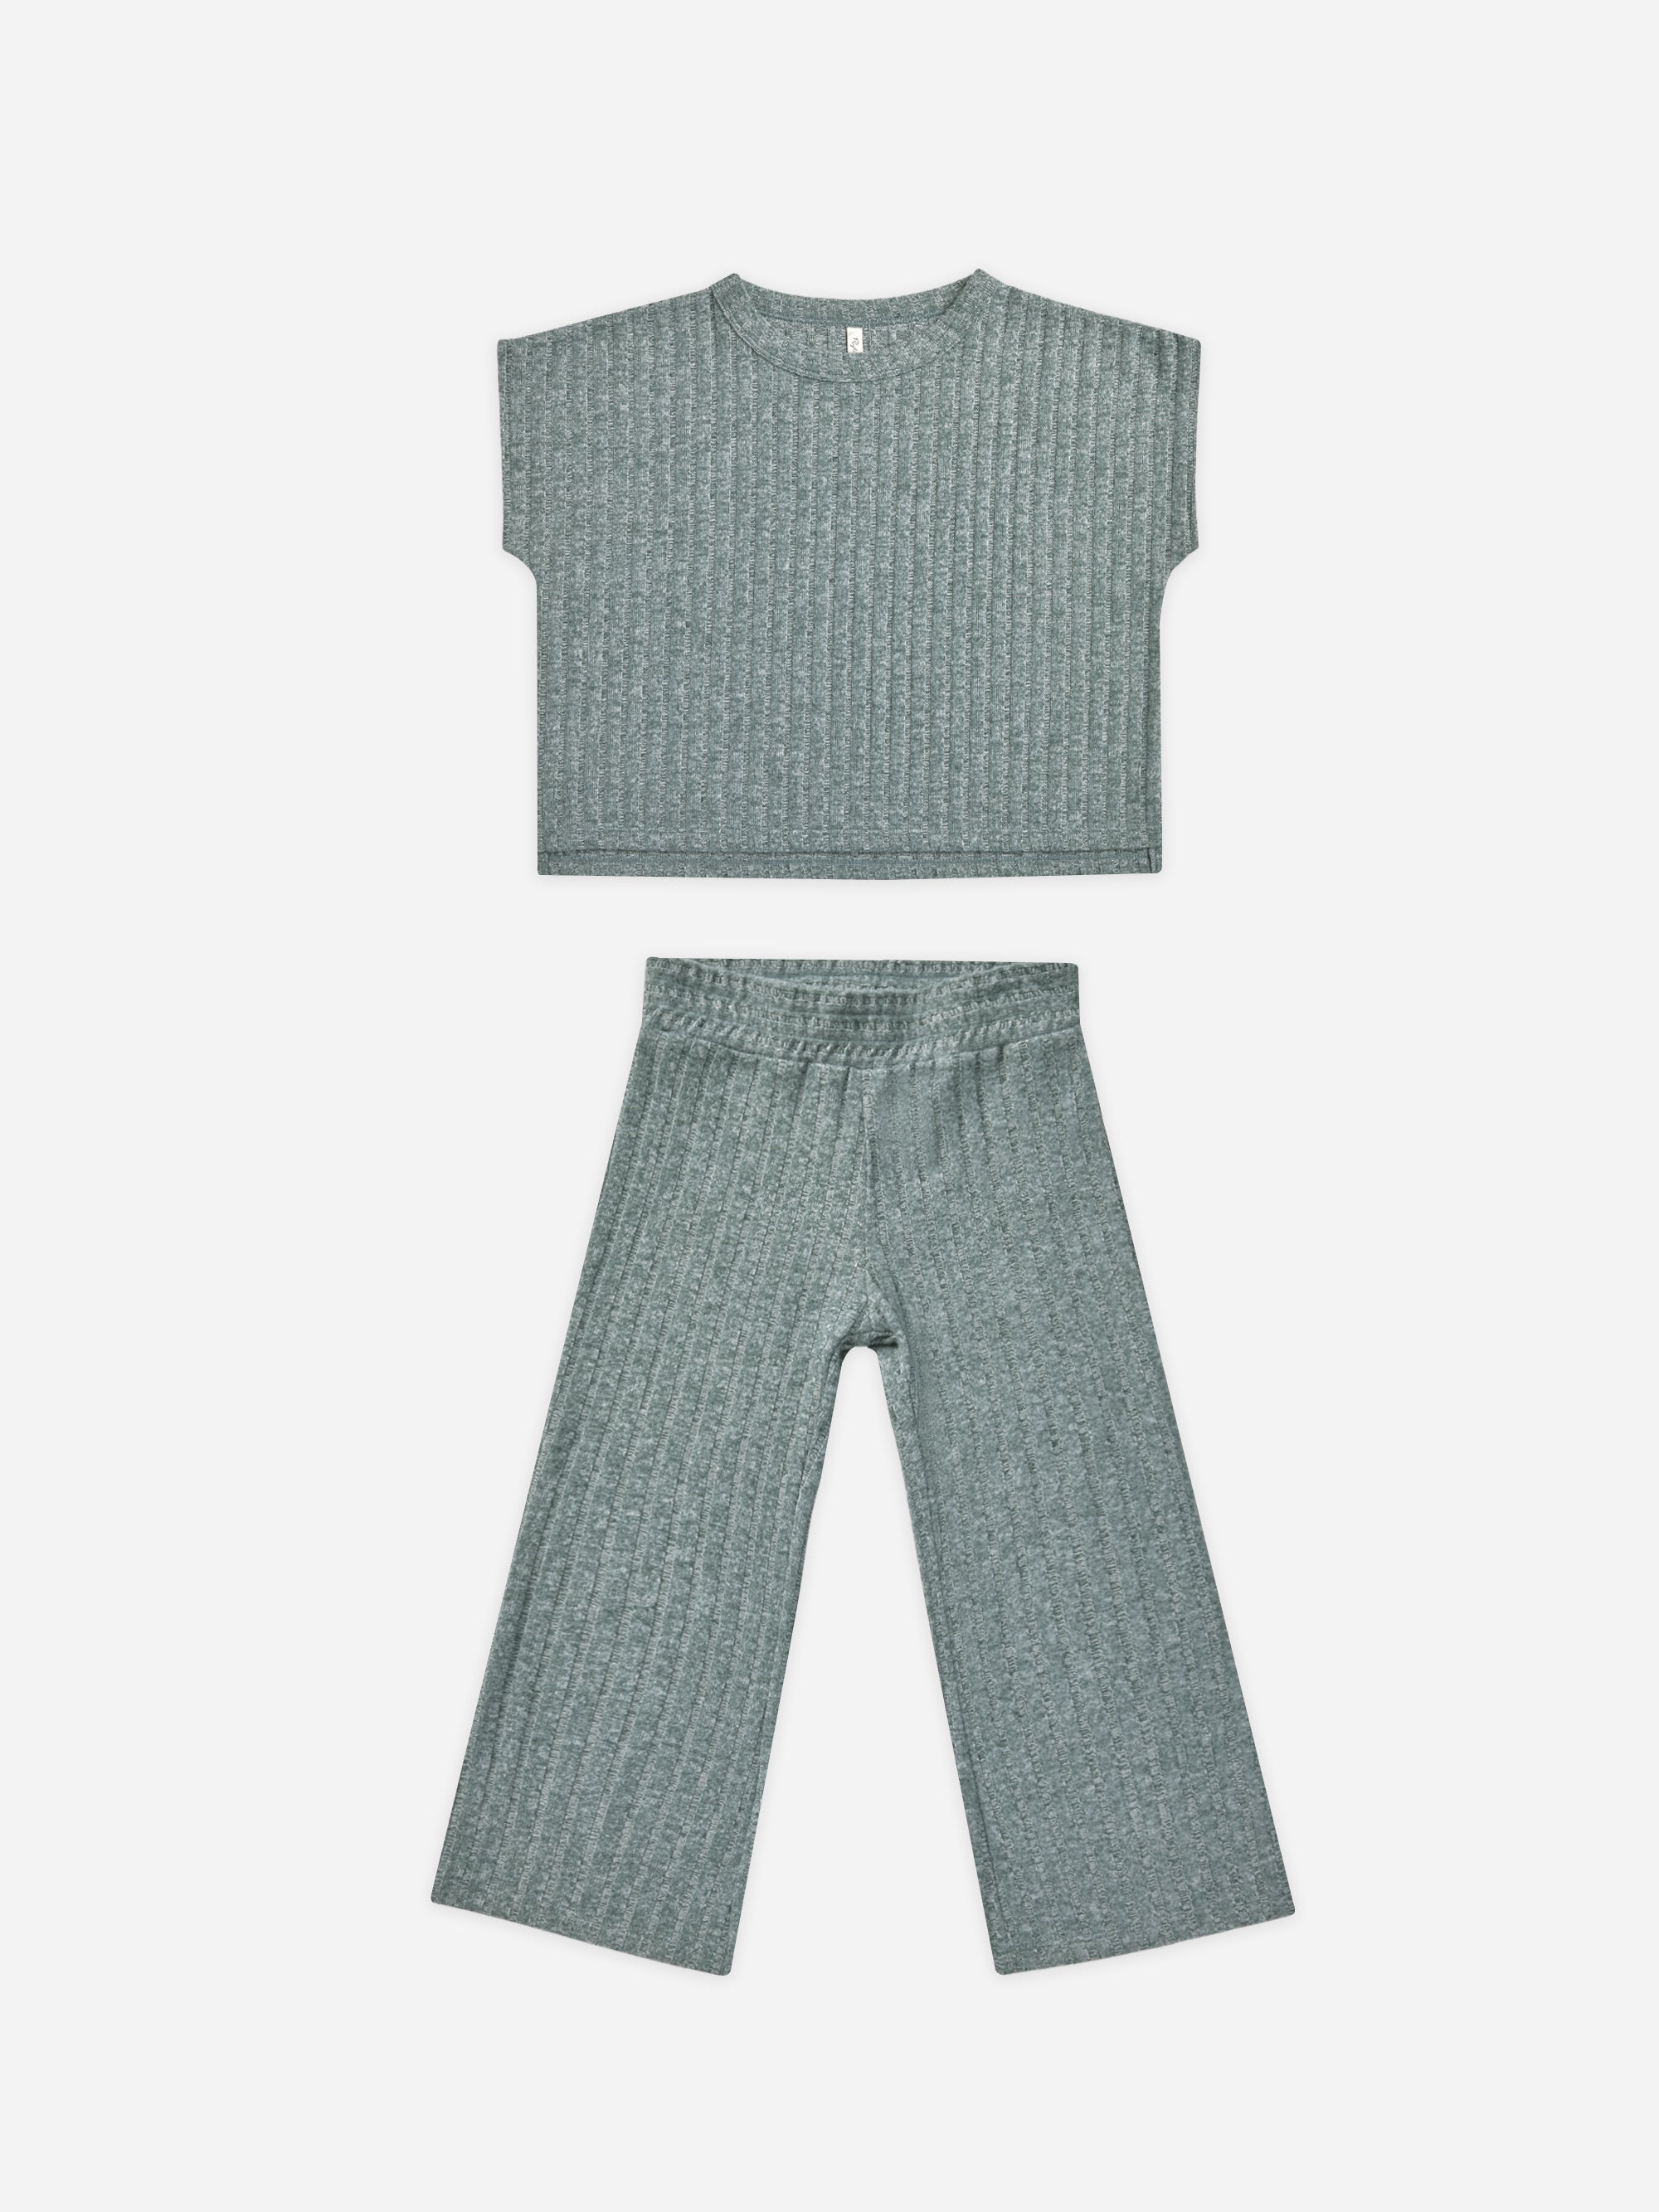 Cozy Rib Knit Set || Heathered Indigo - Rylee + Cru | Kids Clothes | Trendy Baby Clothes | Modern Infant Outfits |